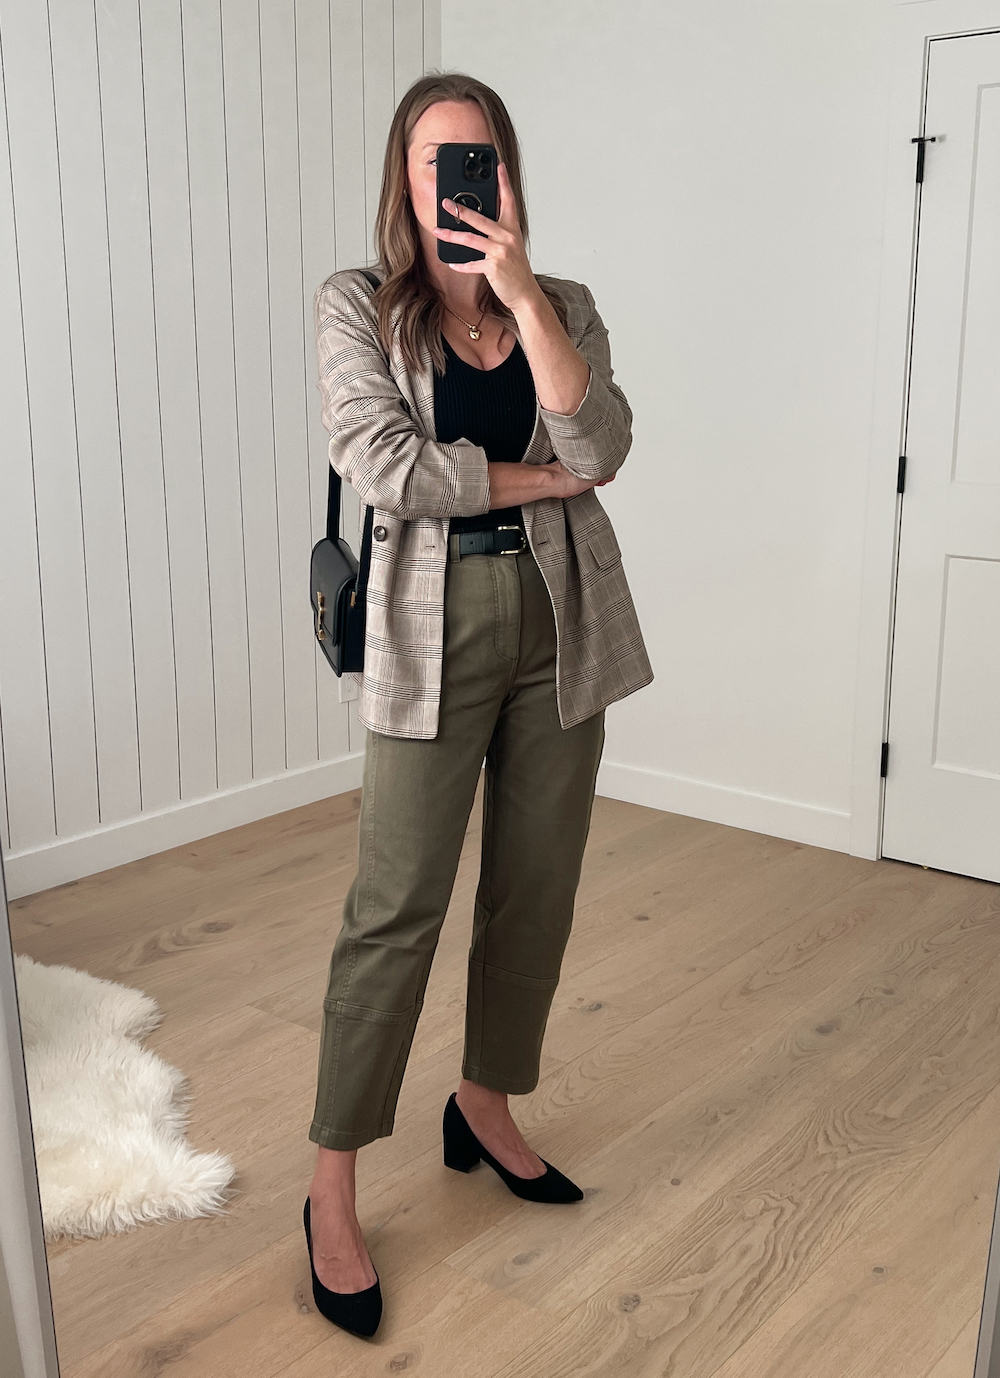 Christal wearing a neutral plaid blazer with olive green pants and black suede heels